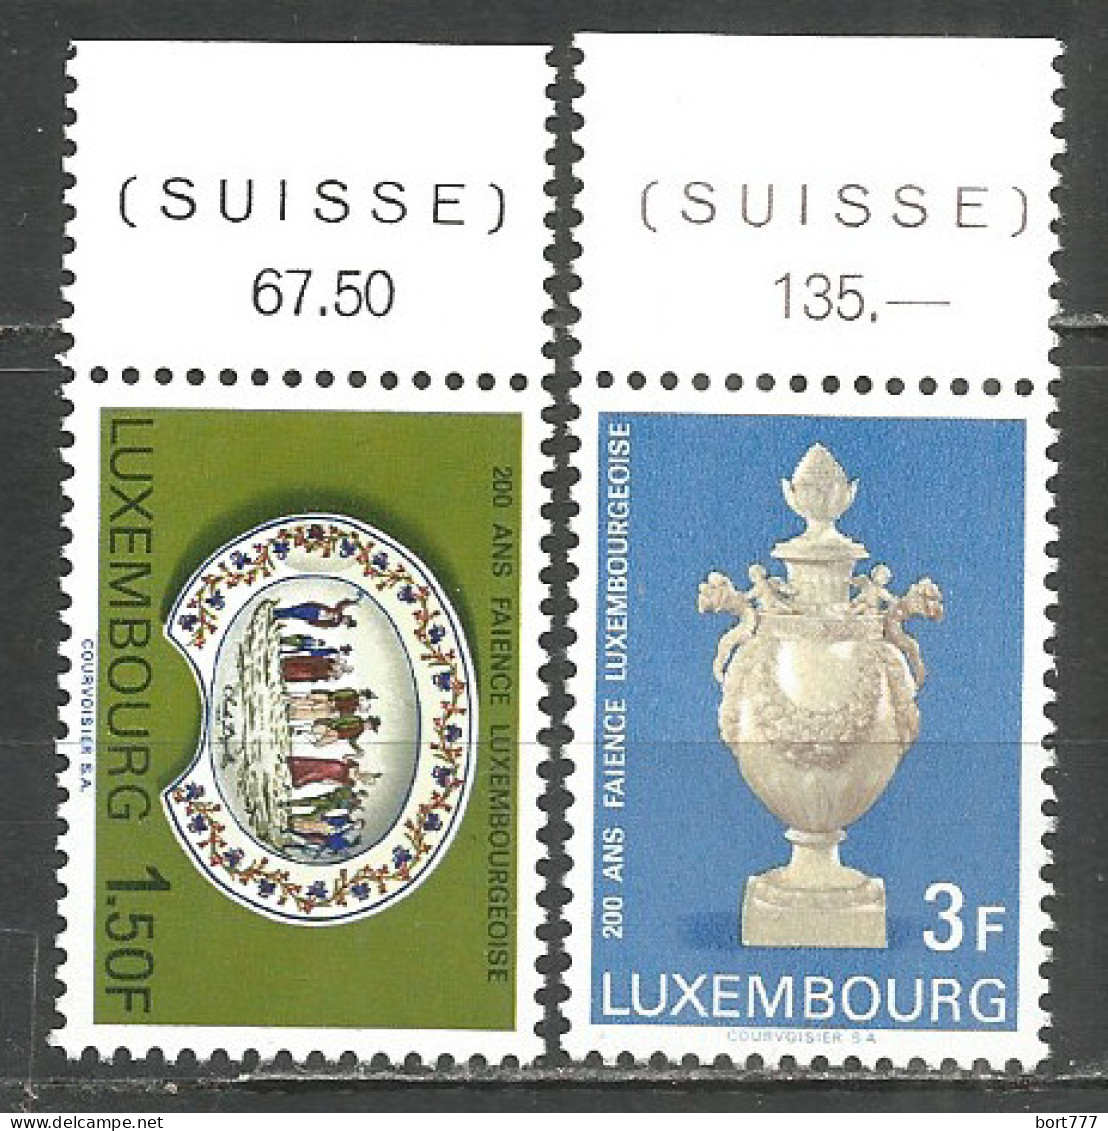 Luxembourg 1967 Year, Mint Stamps MNH (**)  Set - Nuovi